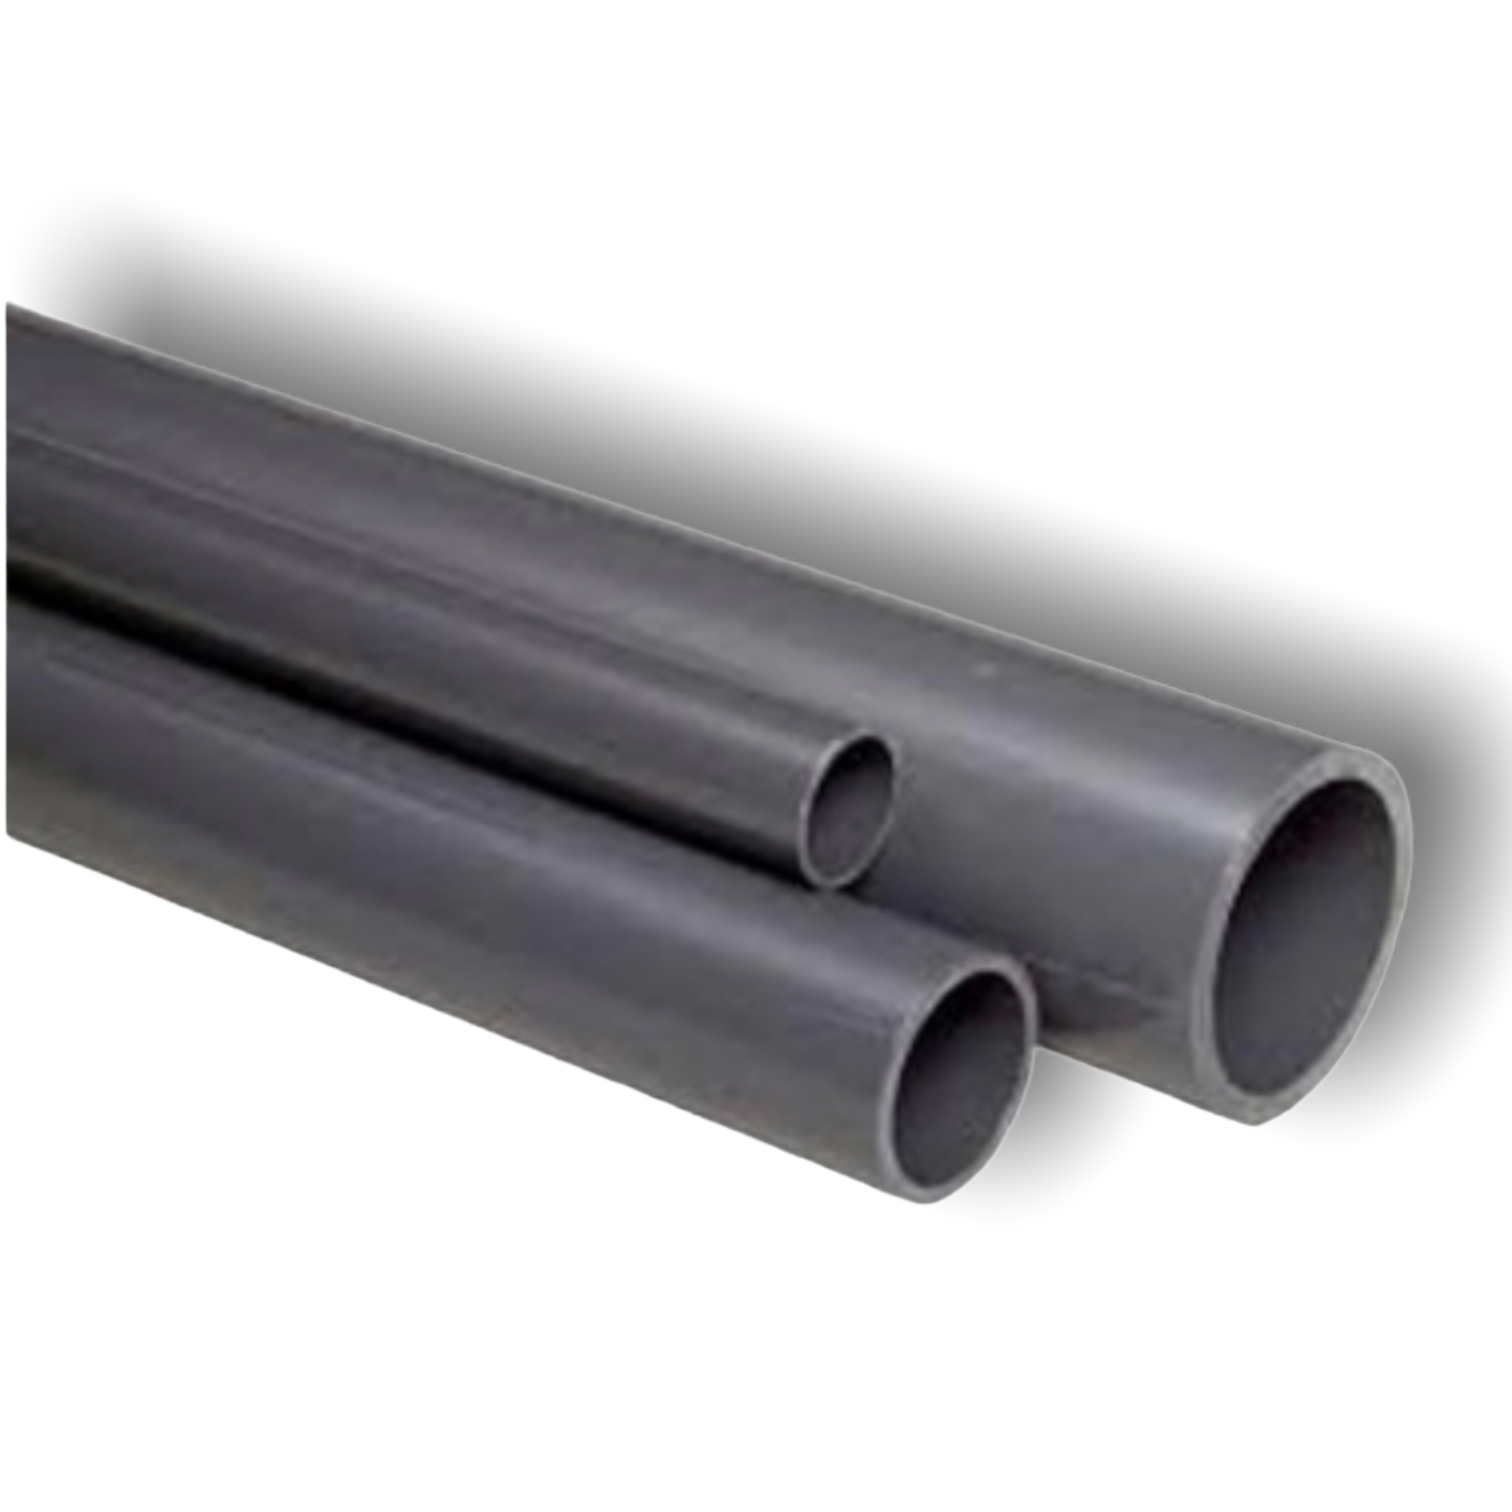 32mm PVC Pipe (Solvent Weld)